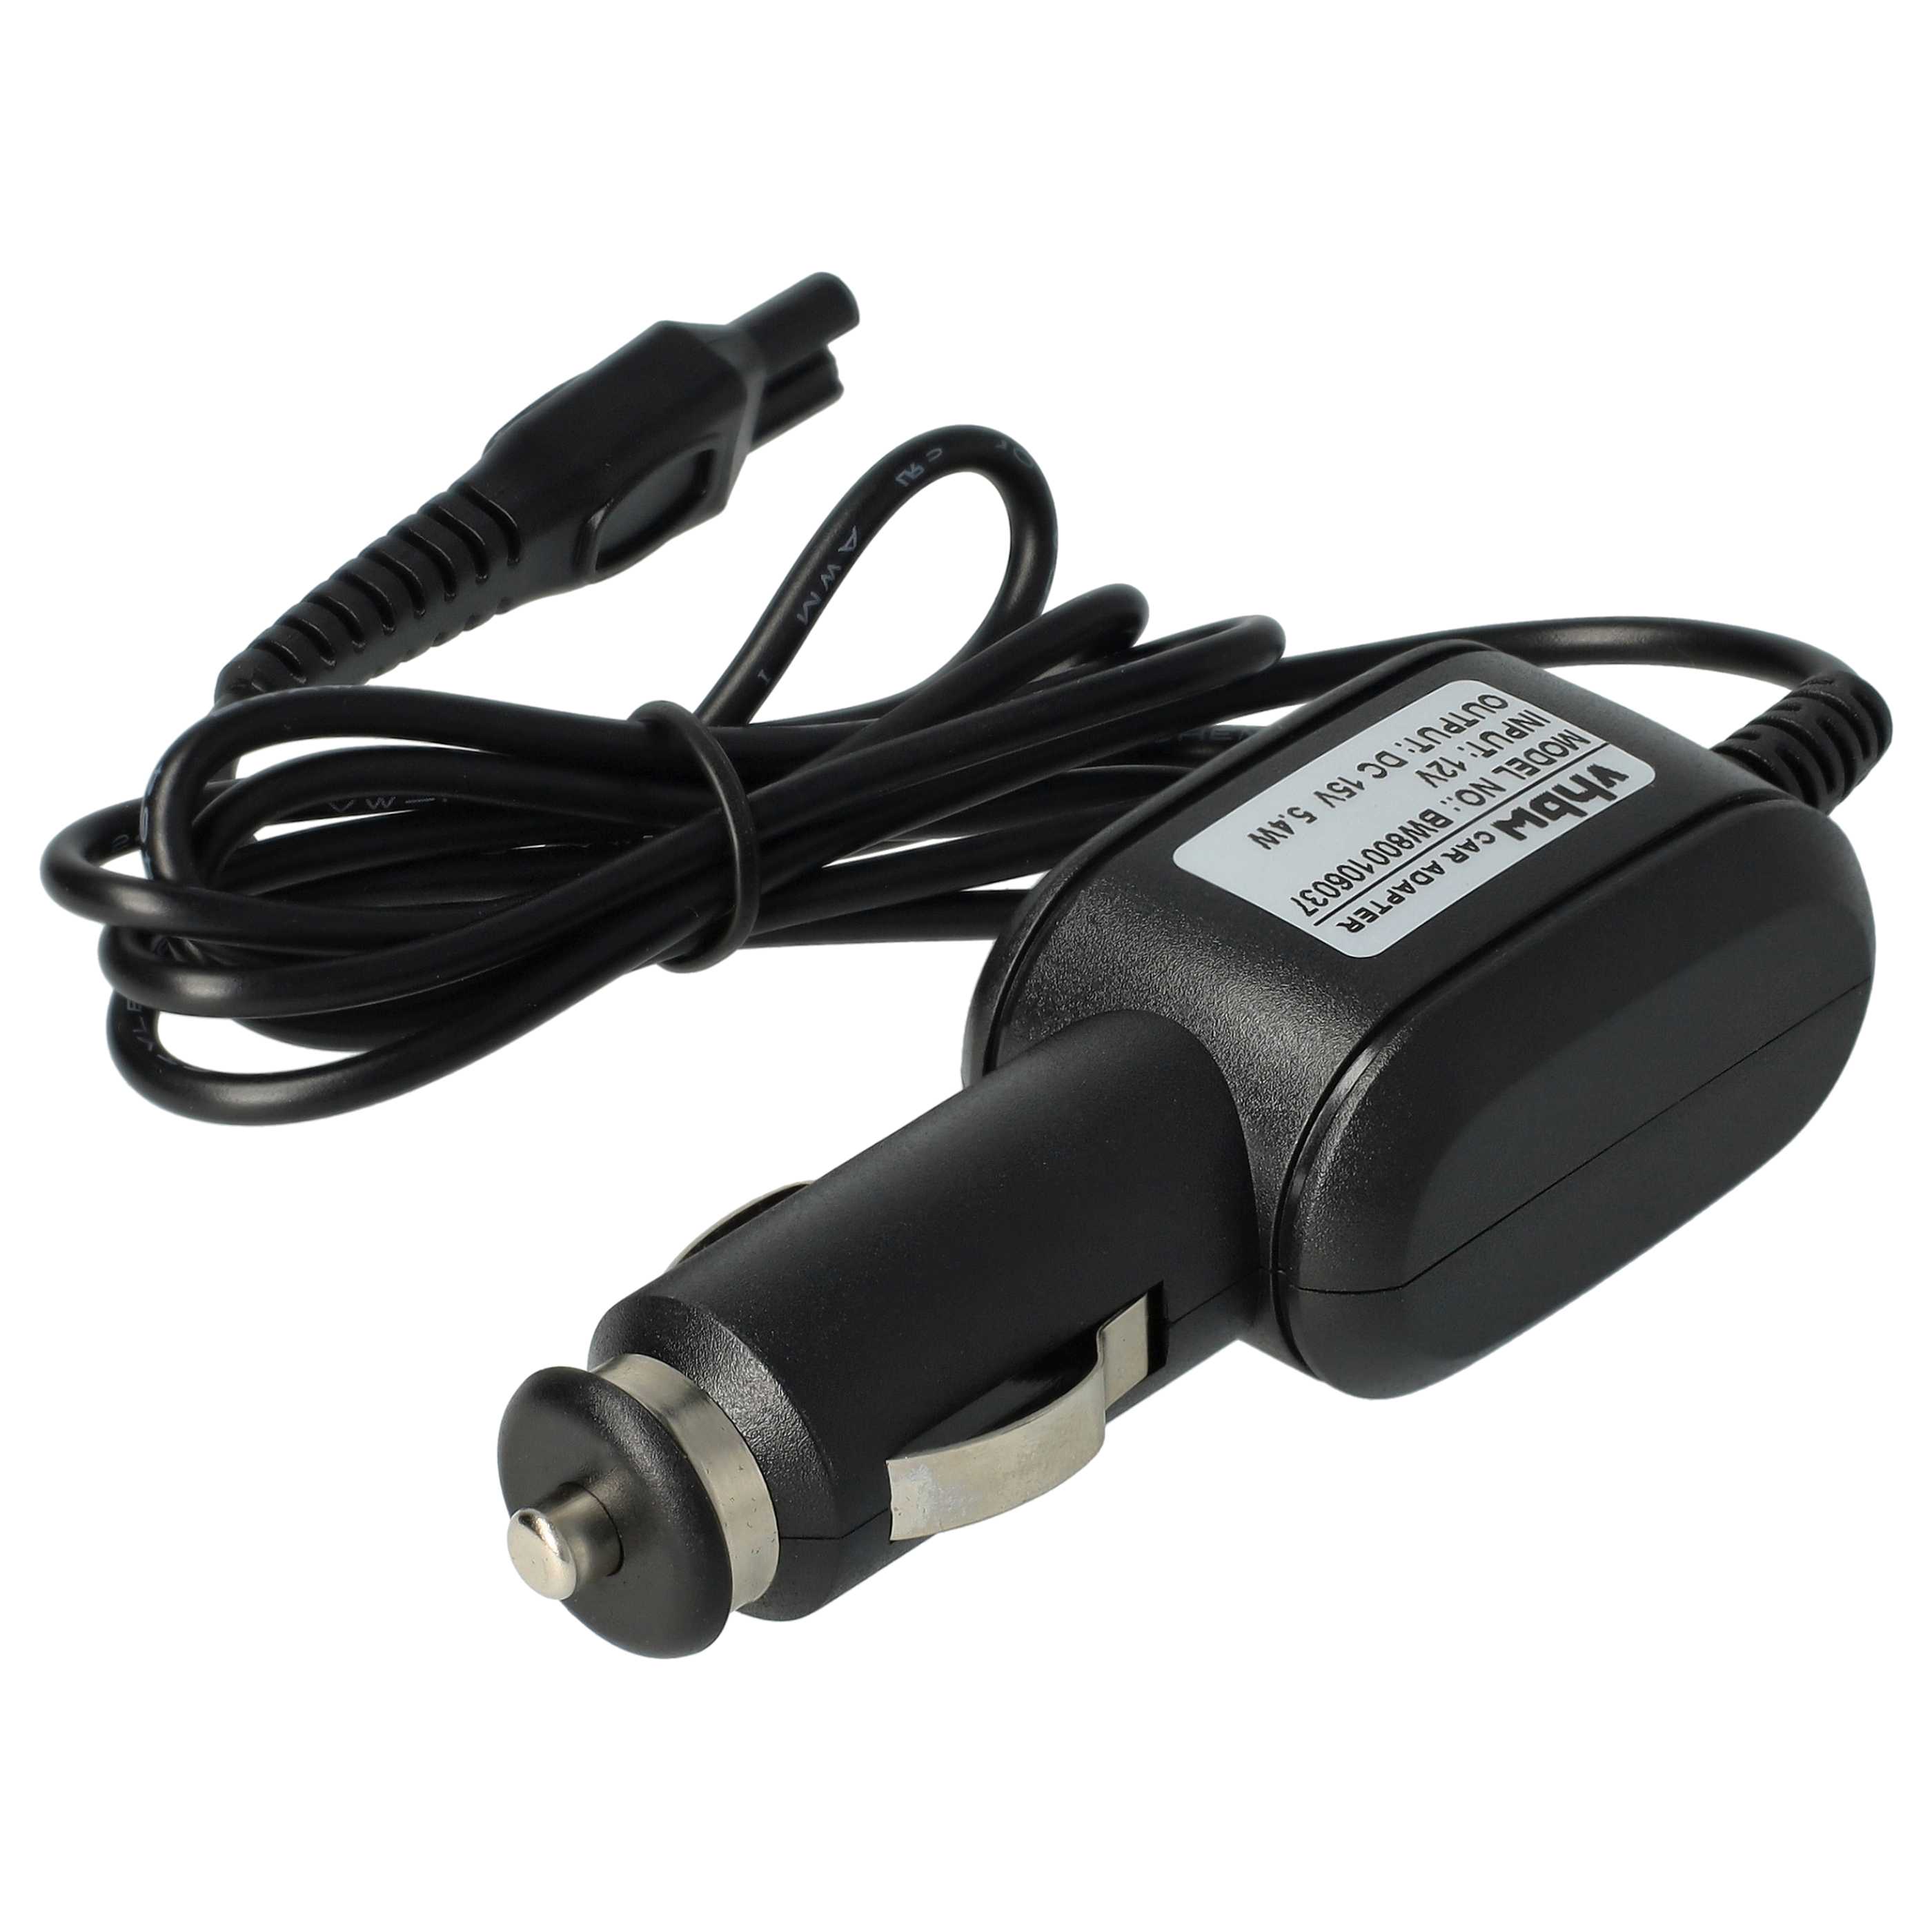 Vehicle Charger suitable for HS8020 Philips, Philips / Norelco HS8020 Shaver etc. - 12 V Car Charger